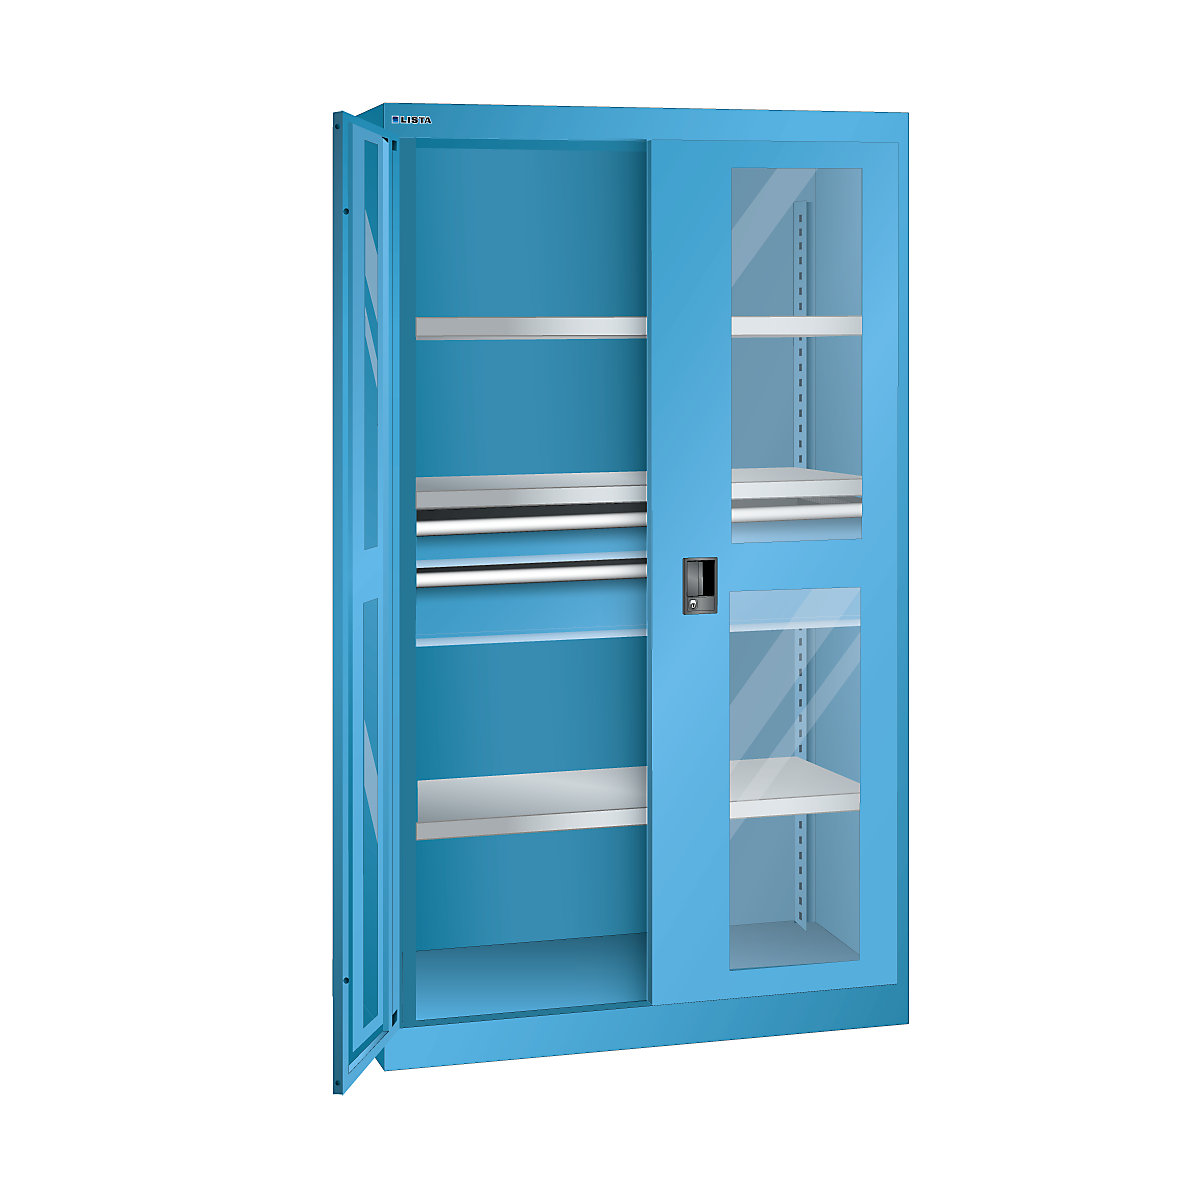 Heavy duty cupboard – LISTA, 3 shelves, 2 drawers with vision panel doors, light blue-10